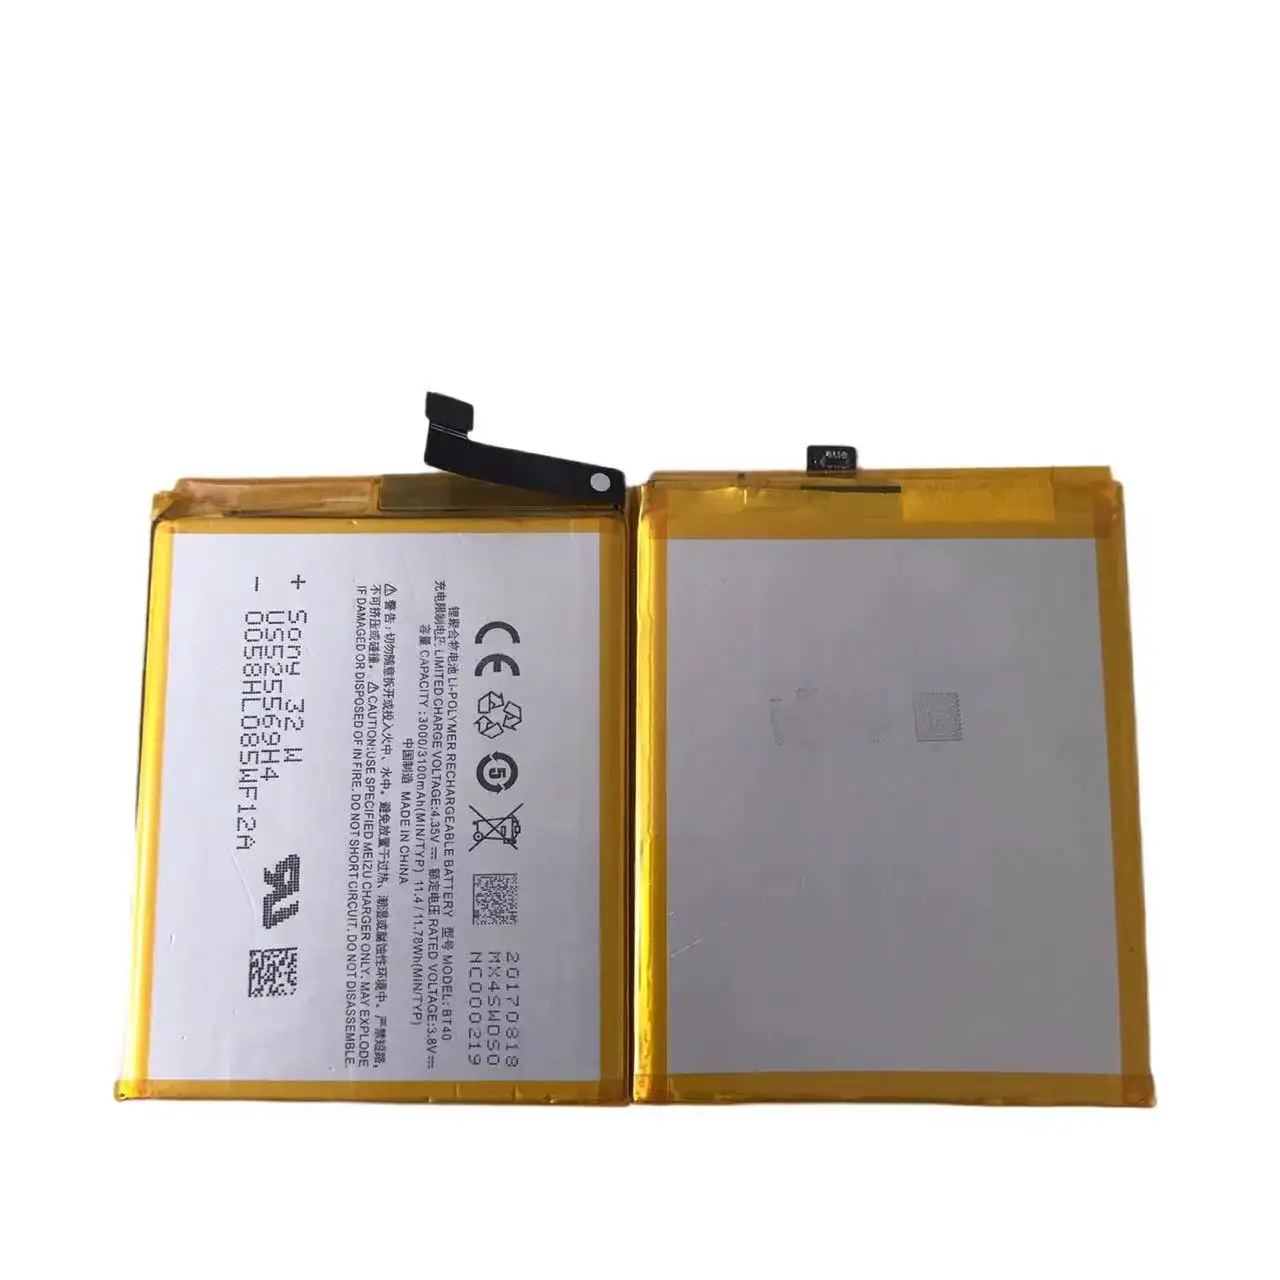 FOR Meizu MX4 battery M460 M461 mobile phone battery Meizu 4 electric board BT40 mobile phone battery